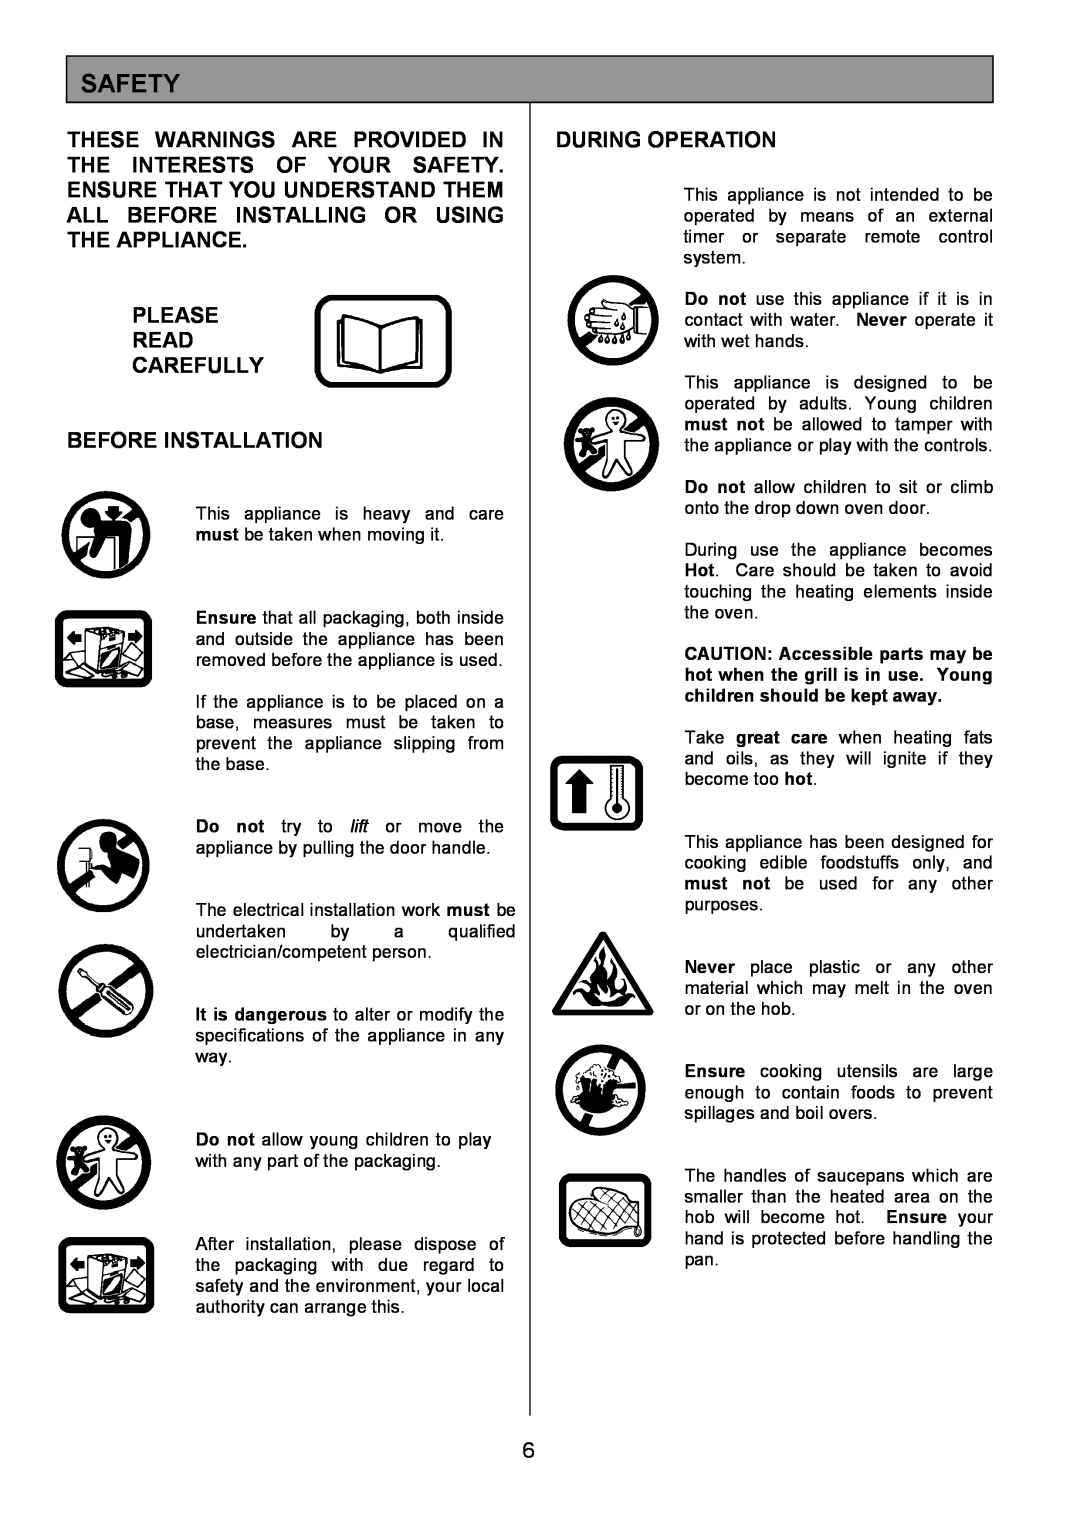 Tricity Bendix SIE 252 installation instructions Safety, Please Read Carefully Before Installation, During Operation 